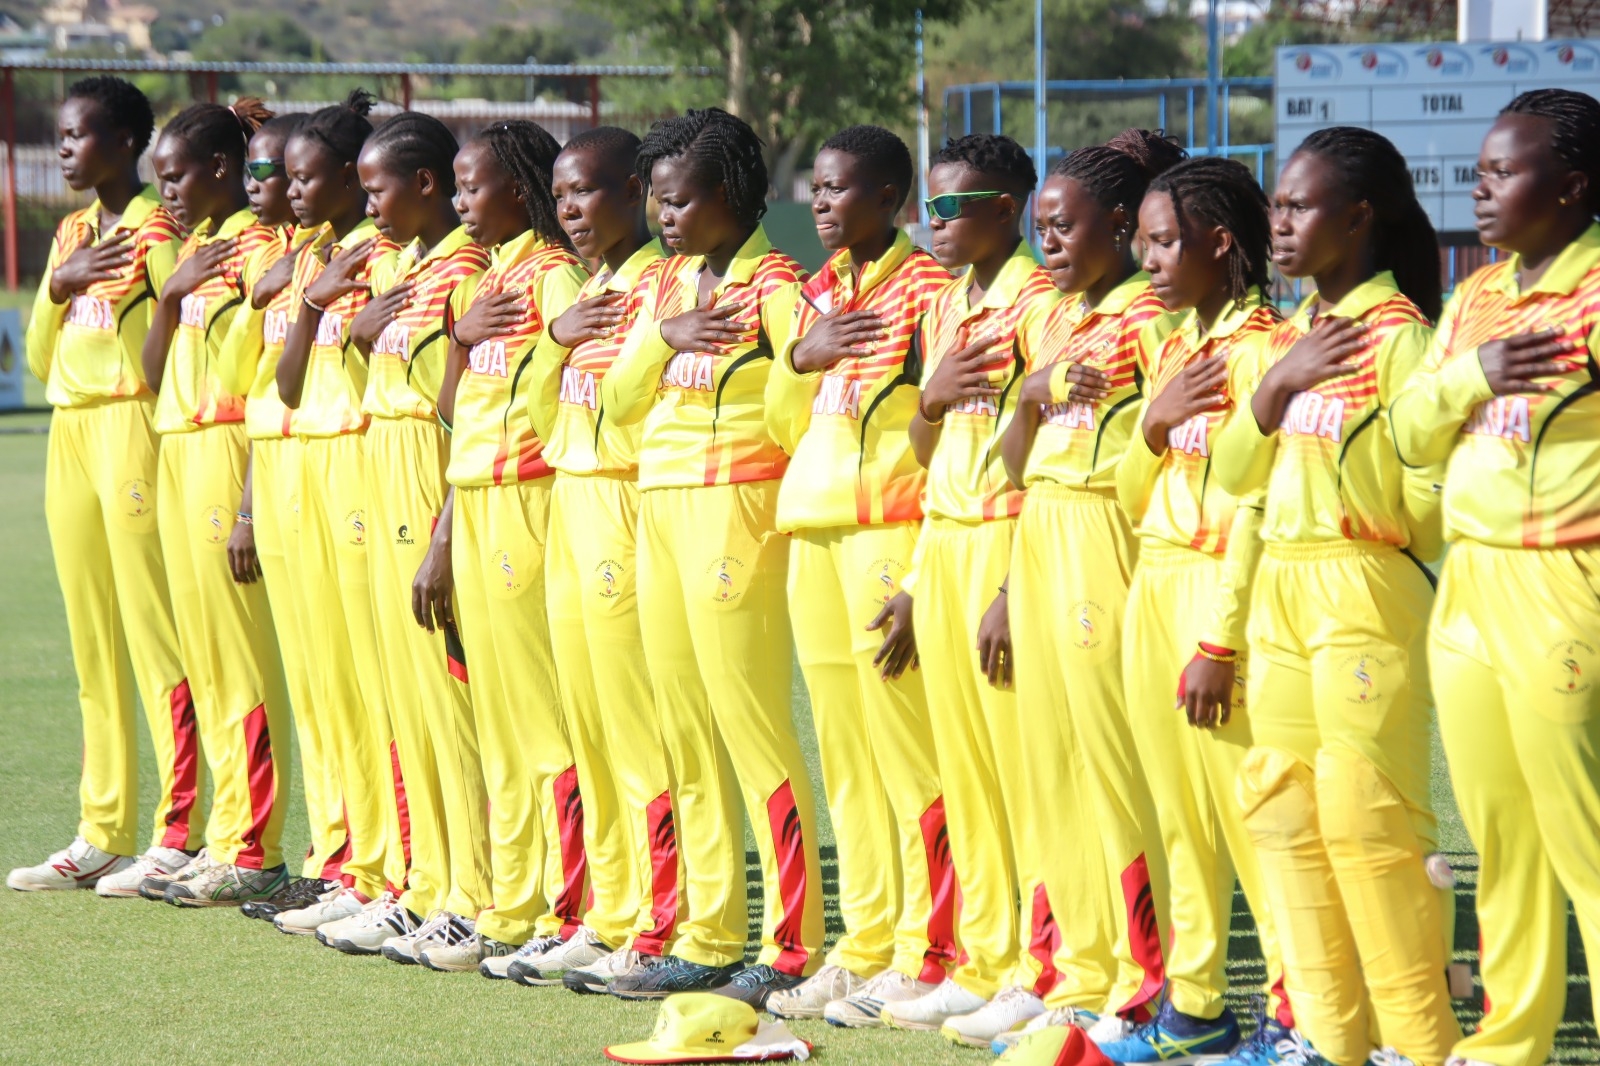  Uganda To Host Icc Women's T20 World Cup Qualifiers For Africa-TeluguStop.com